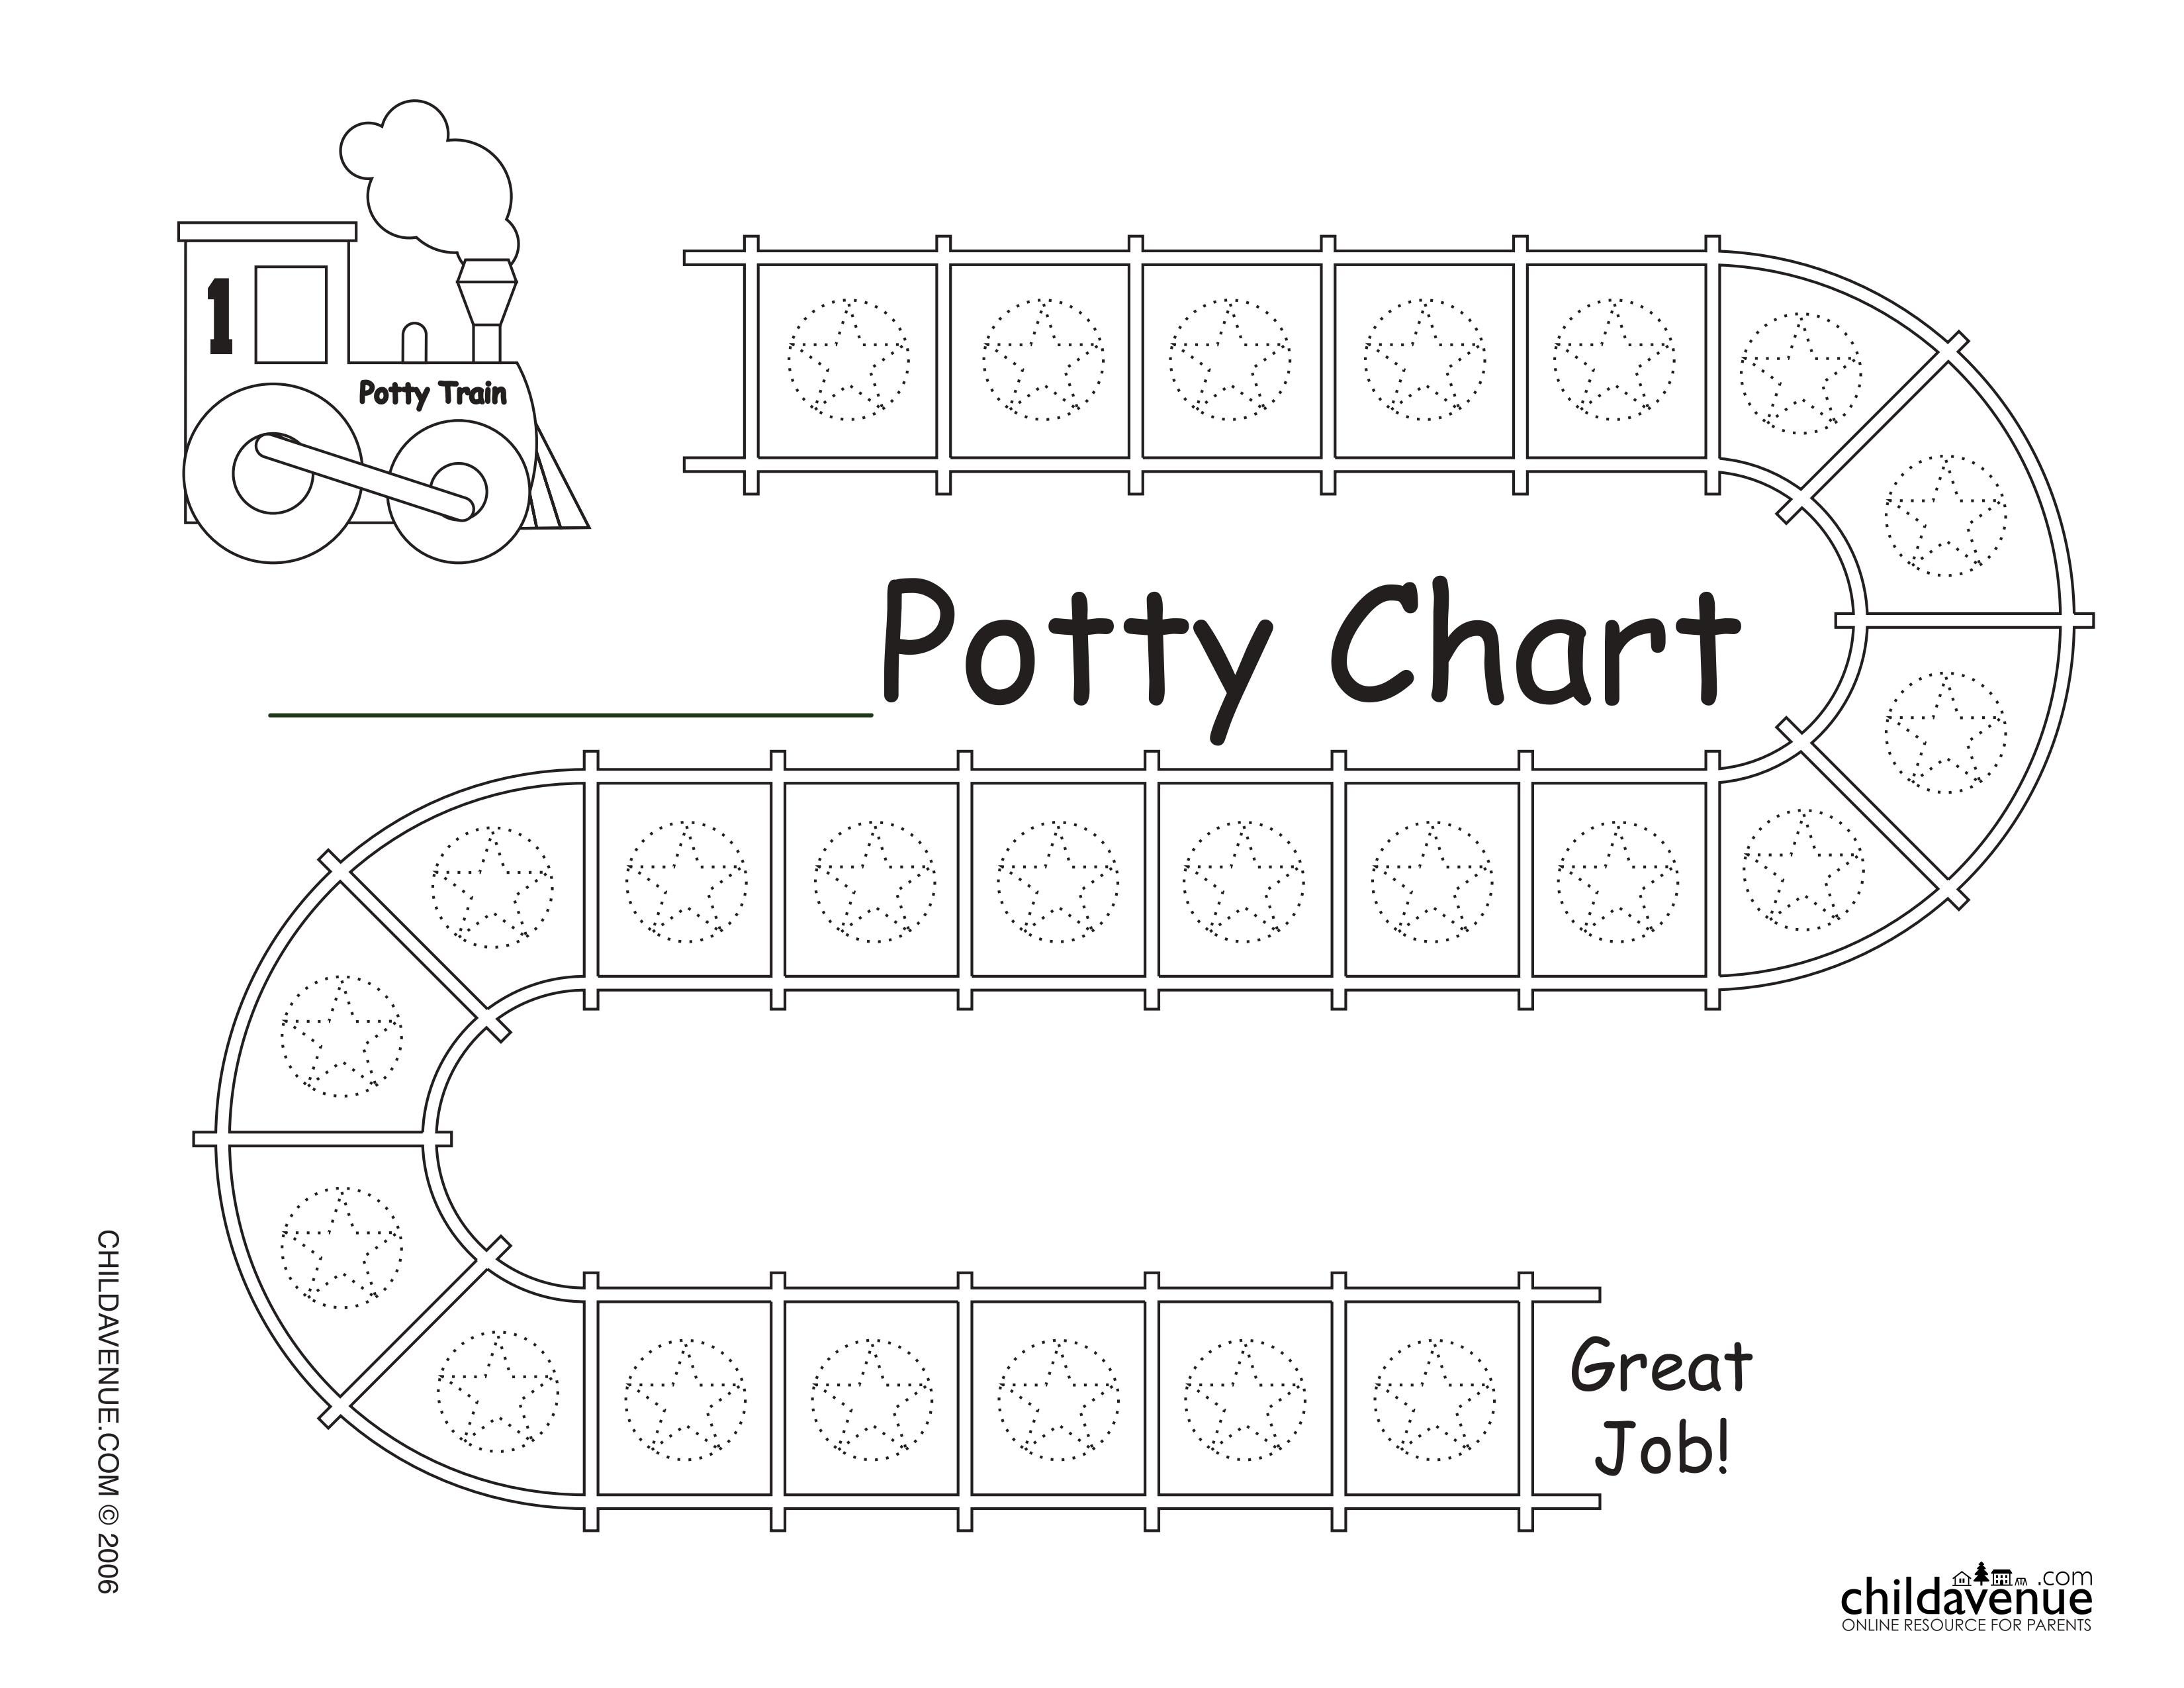 potty-training-sticker-chart-free-printable-get-your-hands-on-amazing-free-printables